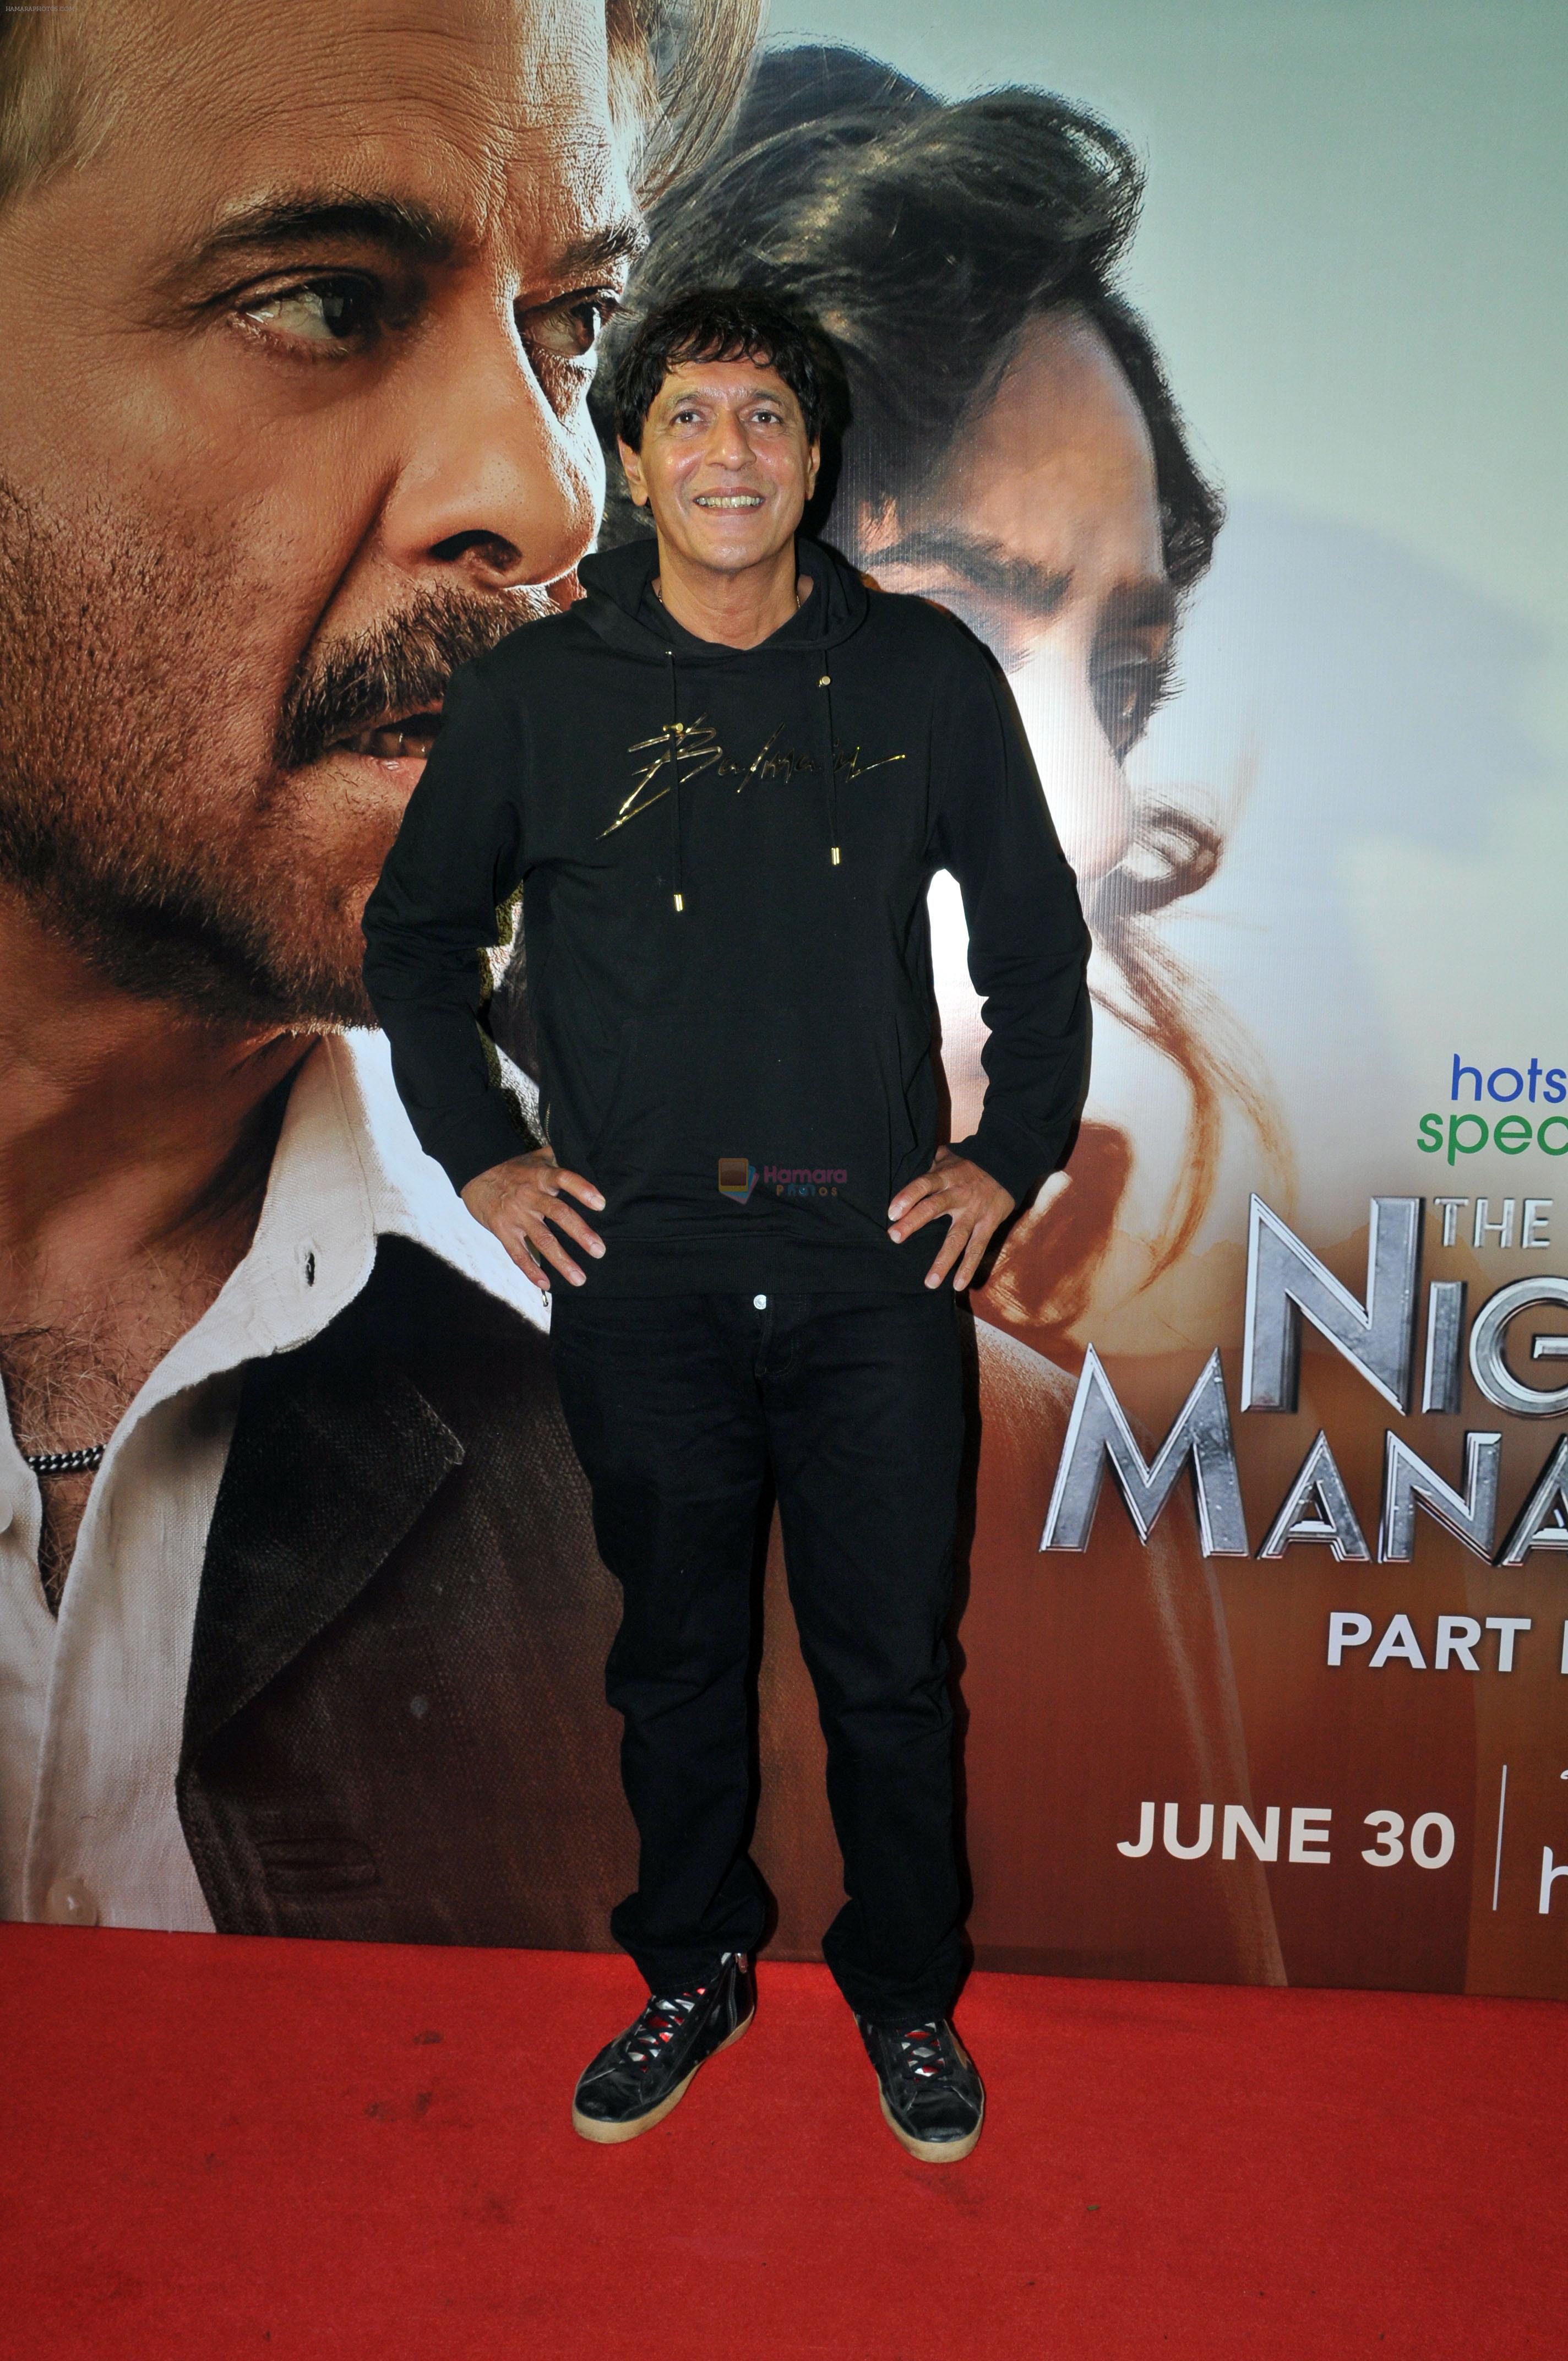 Chunky Panday on the Red Carpet during screening of series The Night Manager Season 2 on 29 Jun 2023